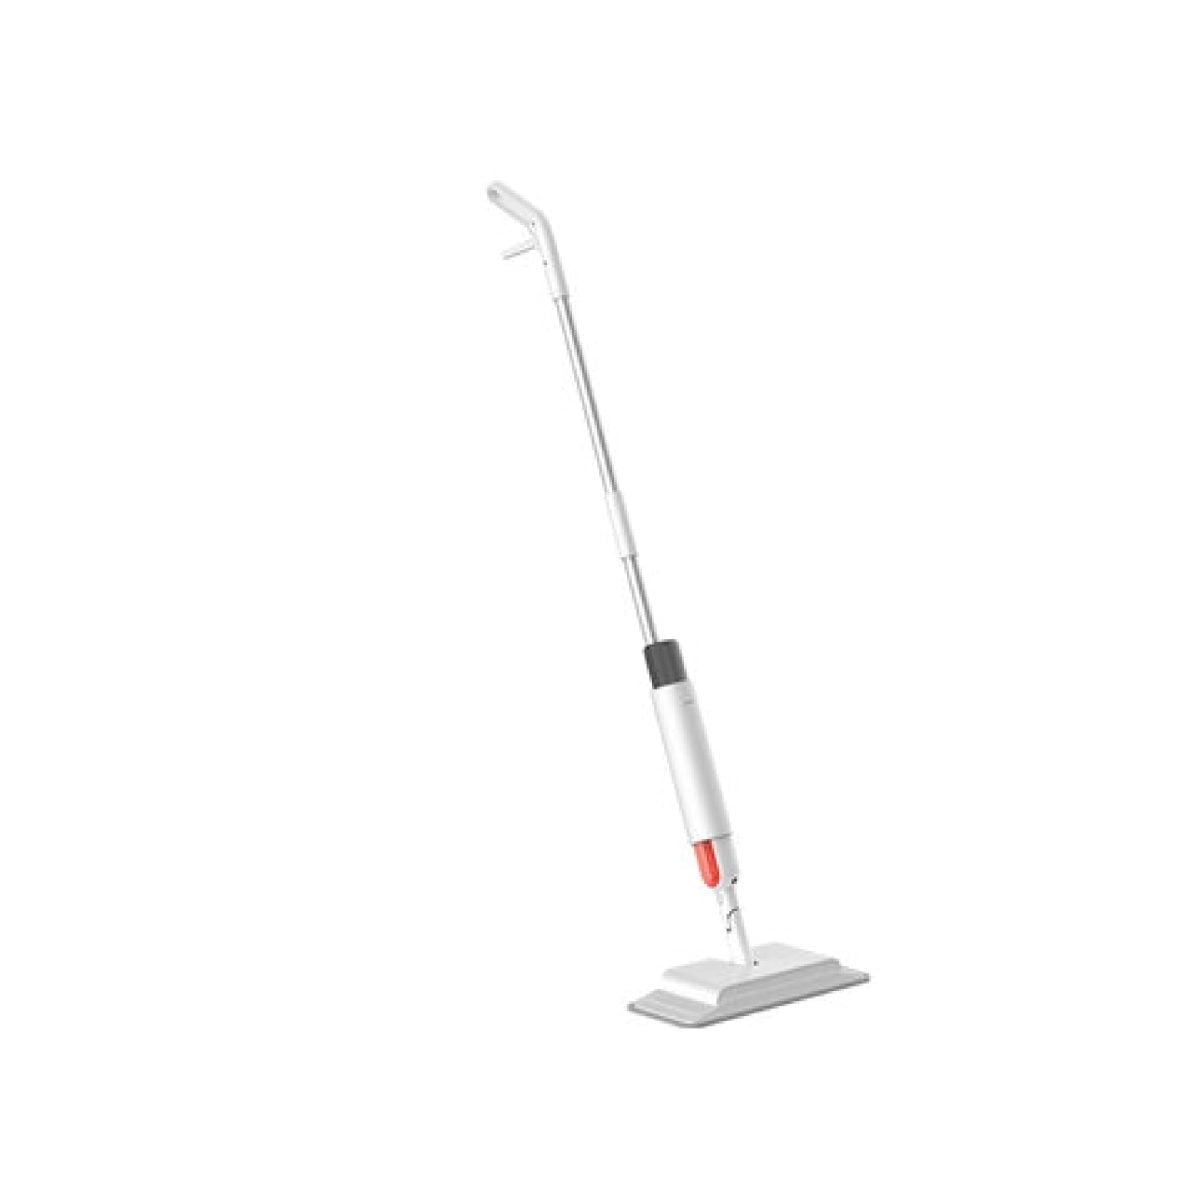 Delmar 07 Xiaomi &Amp;Lt;H1&Amp;Gt;Deerma Dem-Tb900 Sweep Mop With Sweeping / Cleaning Function&Amp;Lt;/H1&Amp;Gt; Easy To Operate, Easy To Push, Long-Distance Spray Can Make The Ground Slightly Damp, High Cleaning Efficiency. Front Roller Brush Spiral Machine, I.e. Pushed Forward Rotation Can Drive The Roller Brush, The Floor Dust Rubbish Swept Into The Dust Box, Dust And No Sweep Net. Soft Bristles Slender, Deep Ground Slit Sweep Out Dust, Clean The Inside And Outside. Deerma Dem-Tb900 Sweep Mop With Sweeping / Cleaning Function